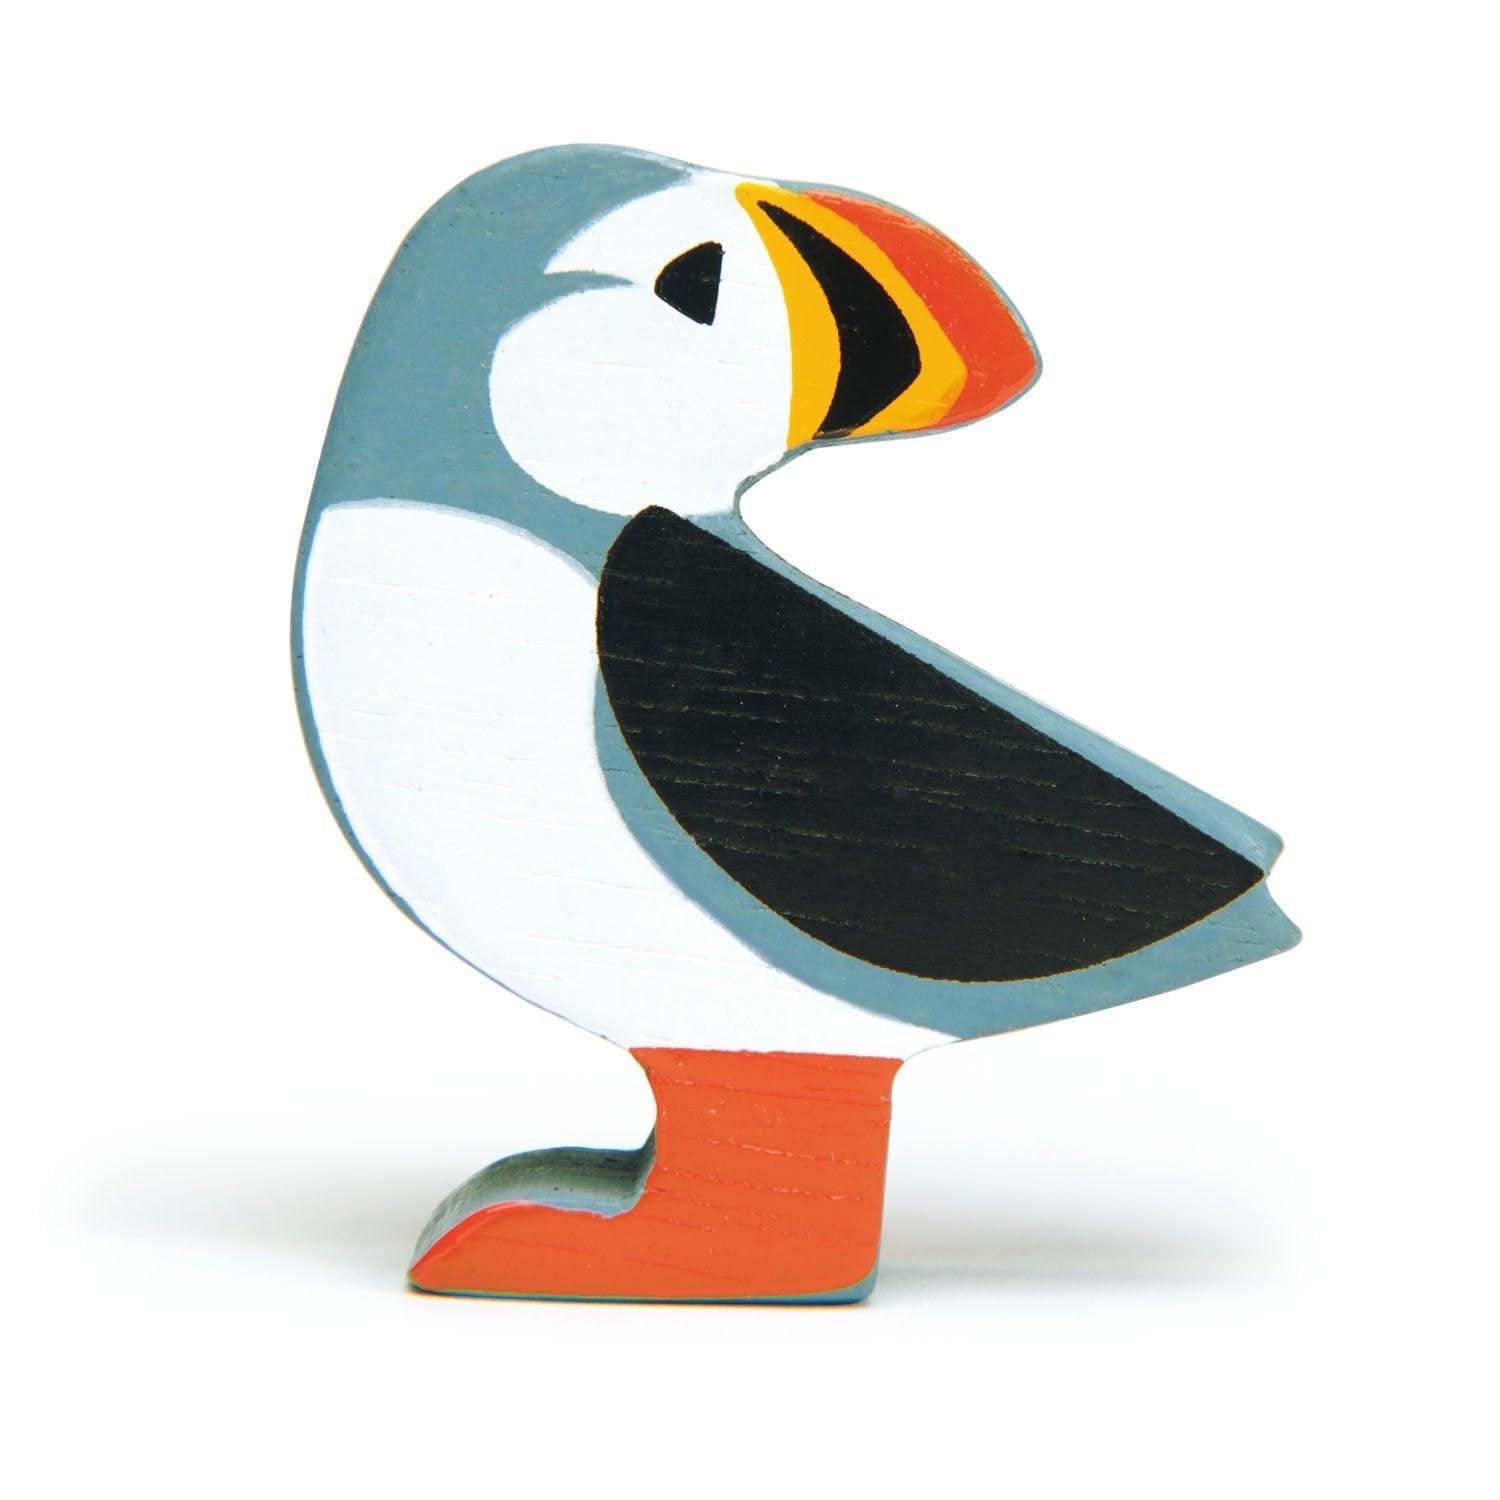 Puffin - Wooden Animal - Tender Leaf Toys - Why and Whale